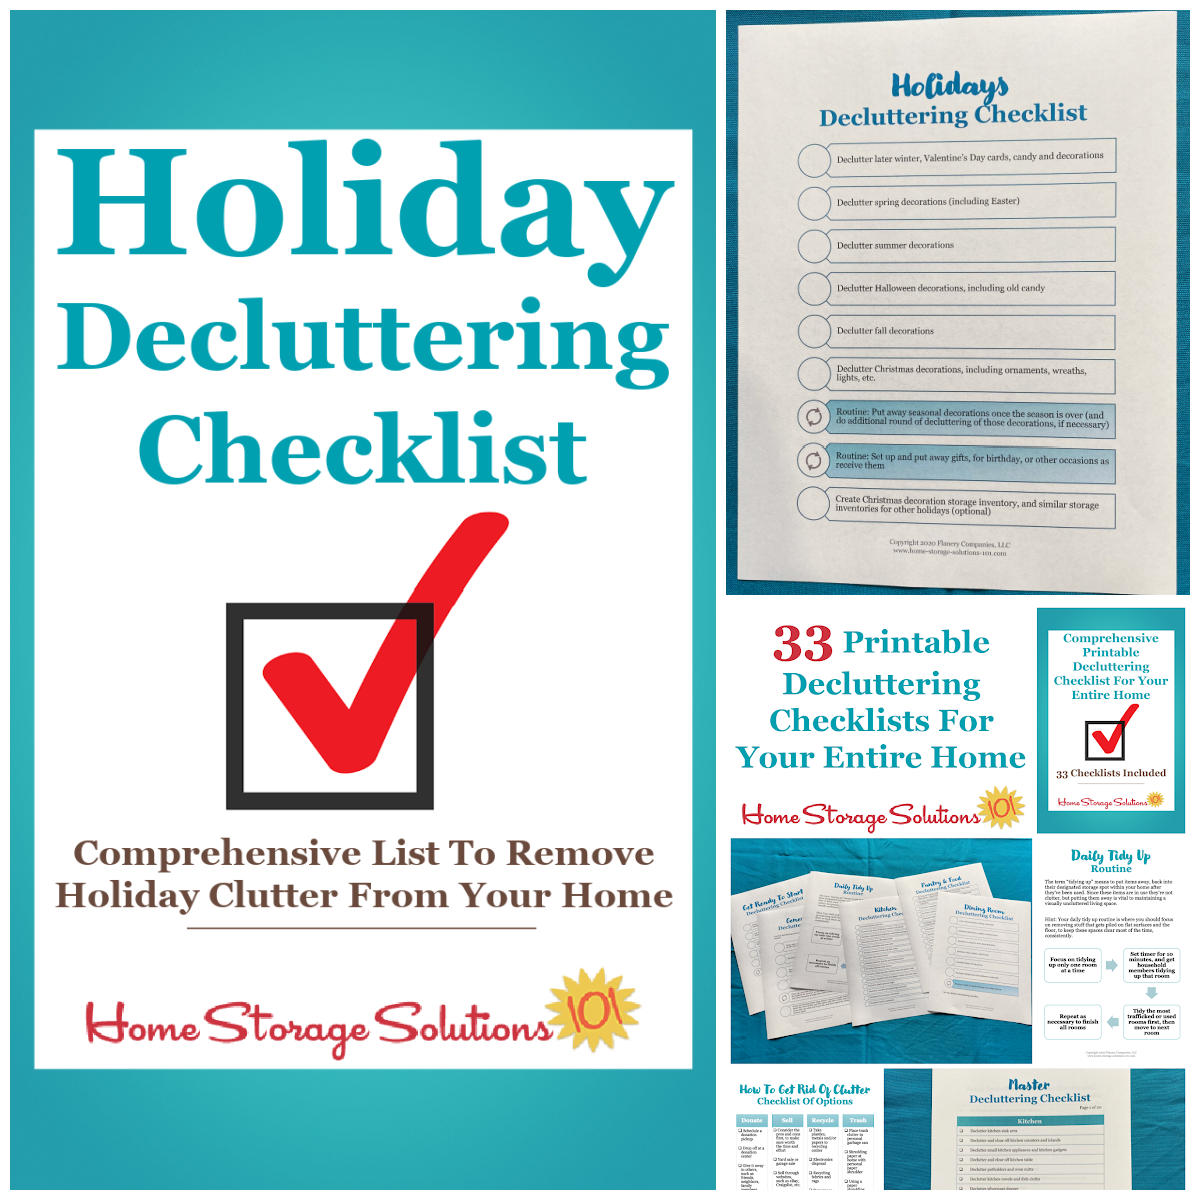 Get this holiday decluttering checklist and 32 other decluttering checklists for your home {on Home Storage Solutions 101}